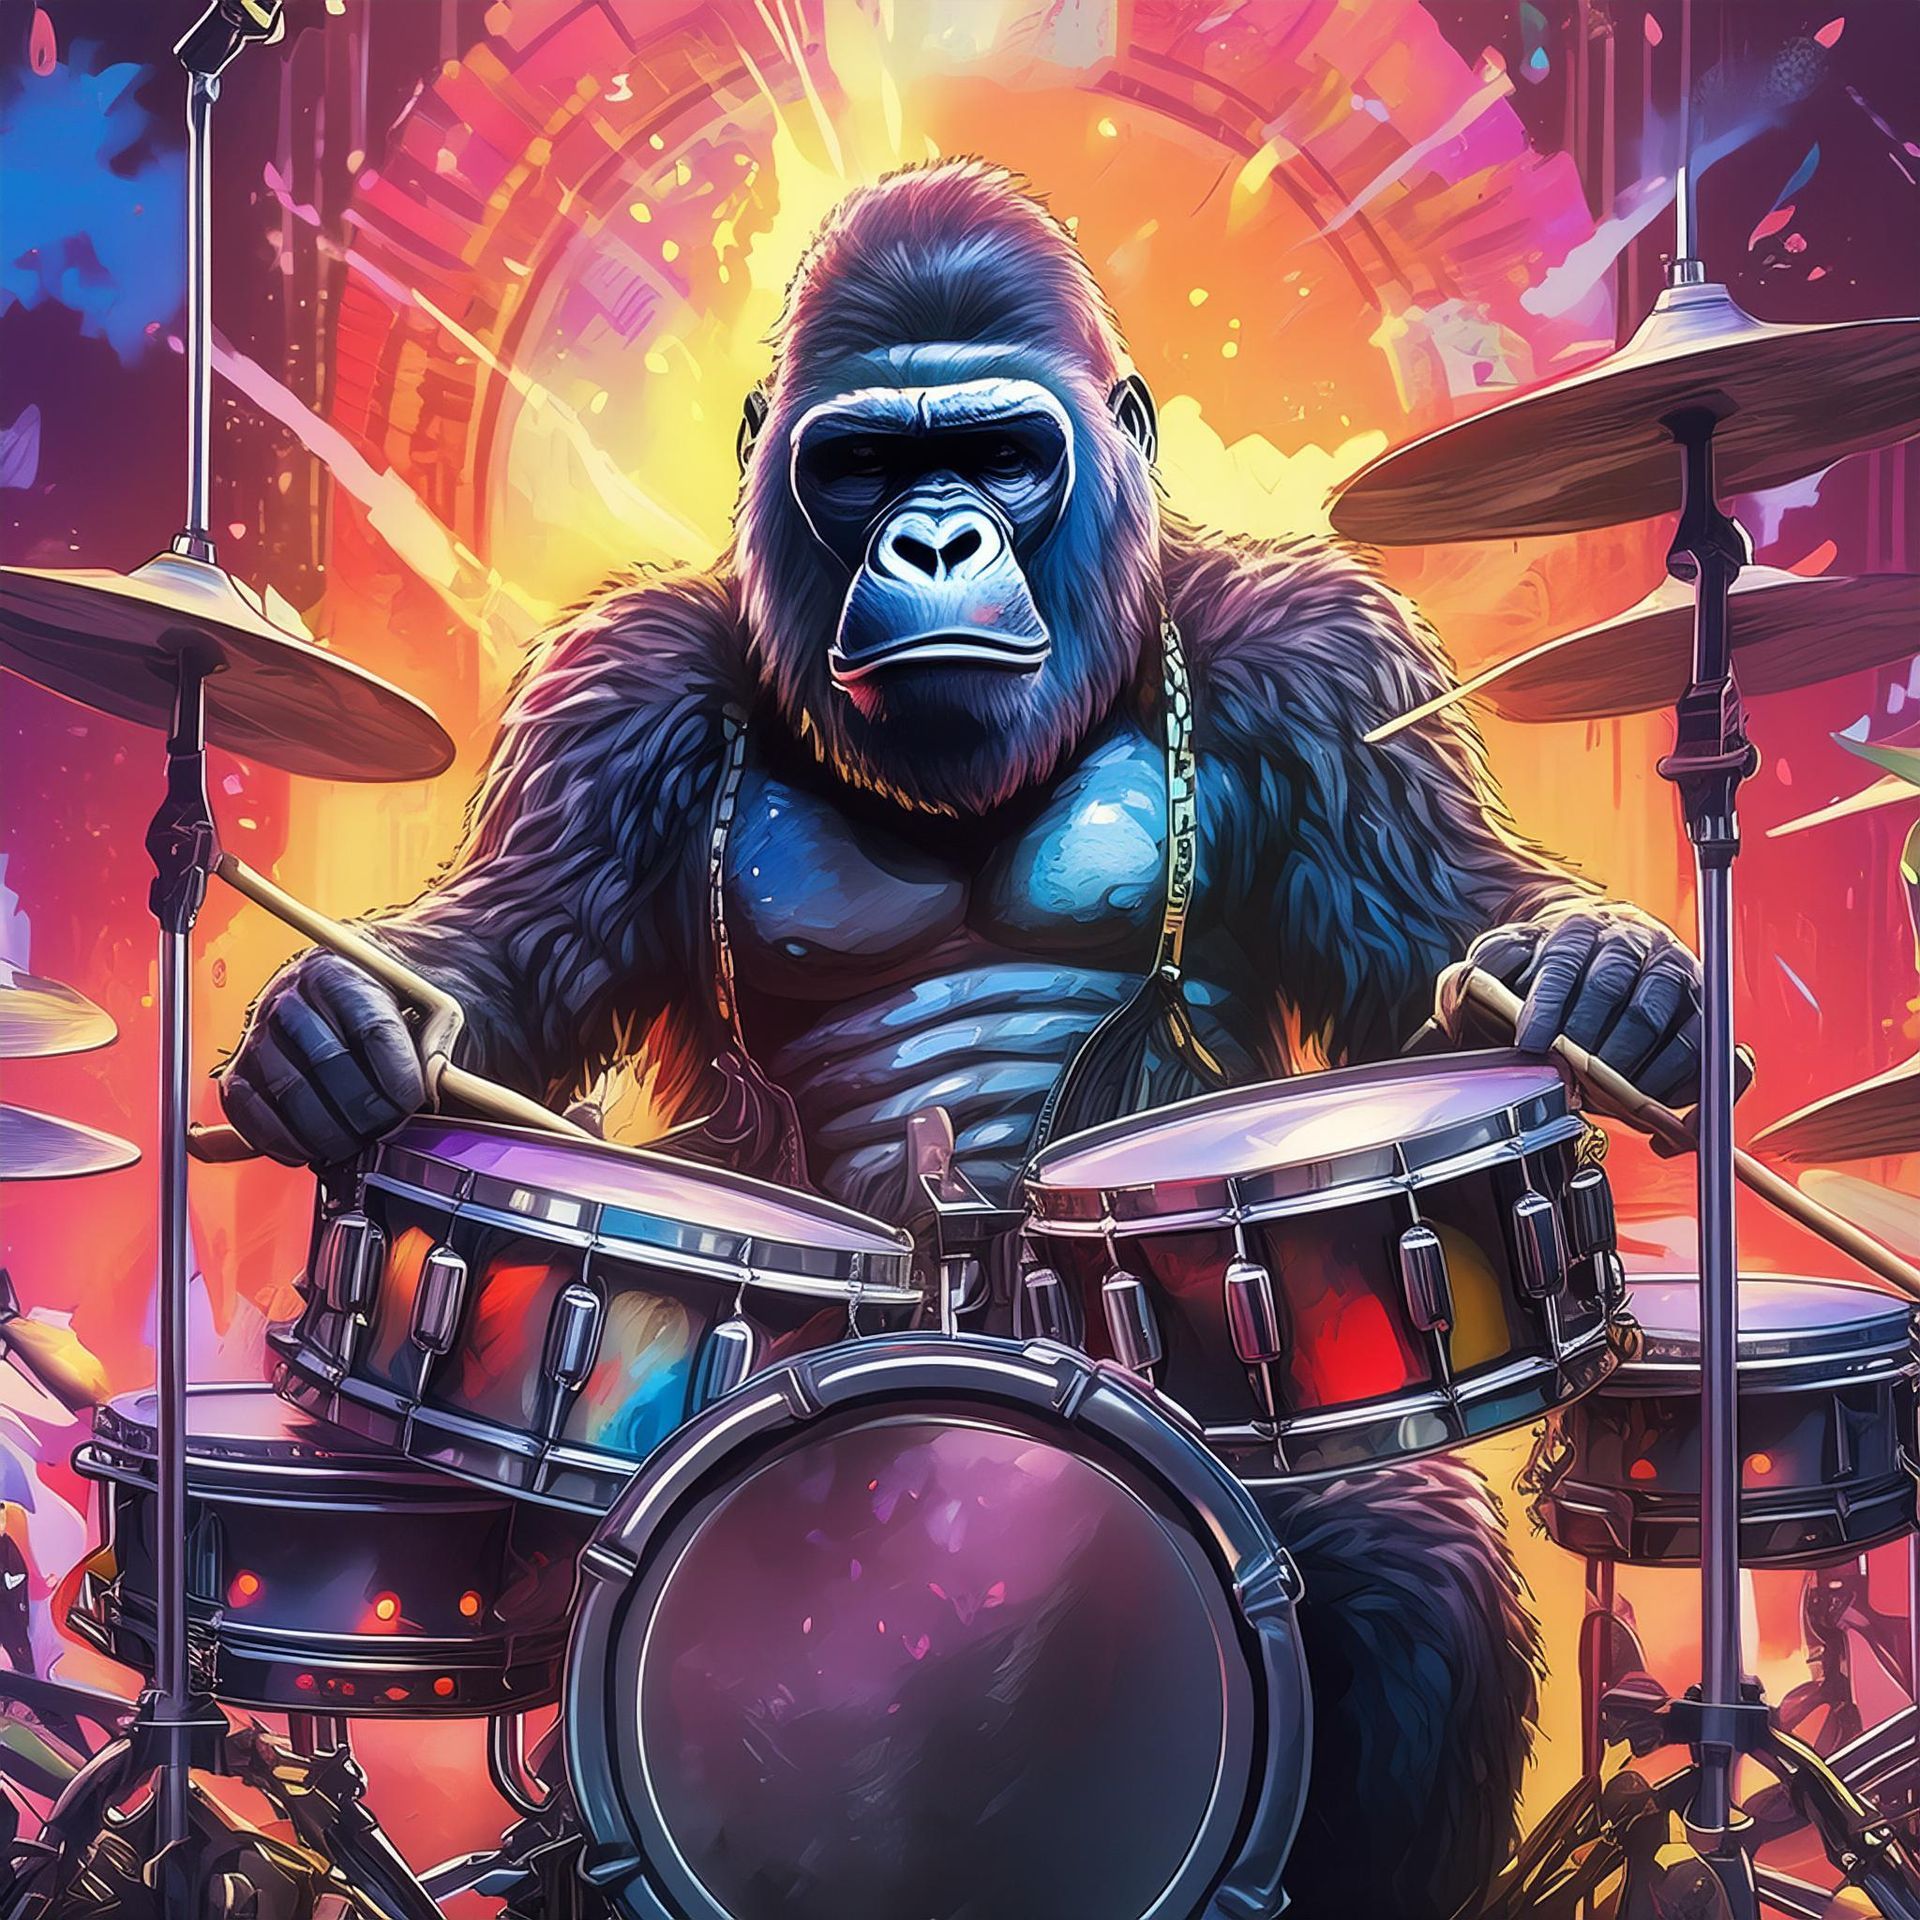 A gorilla is playing drums on a stage.